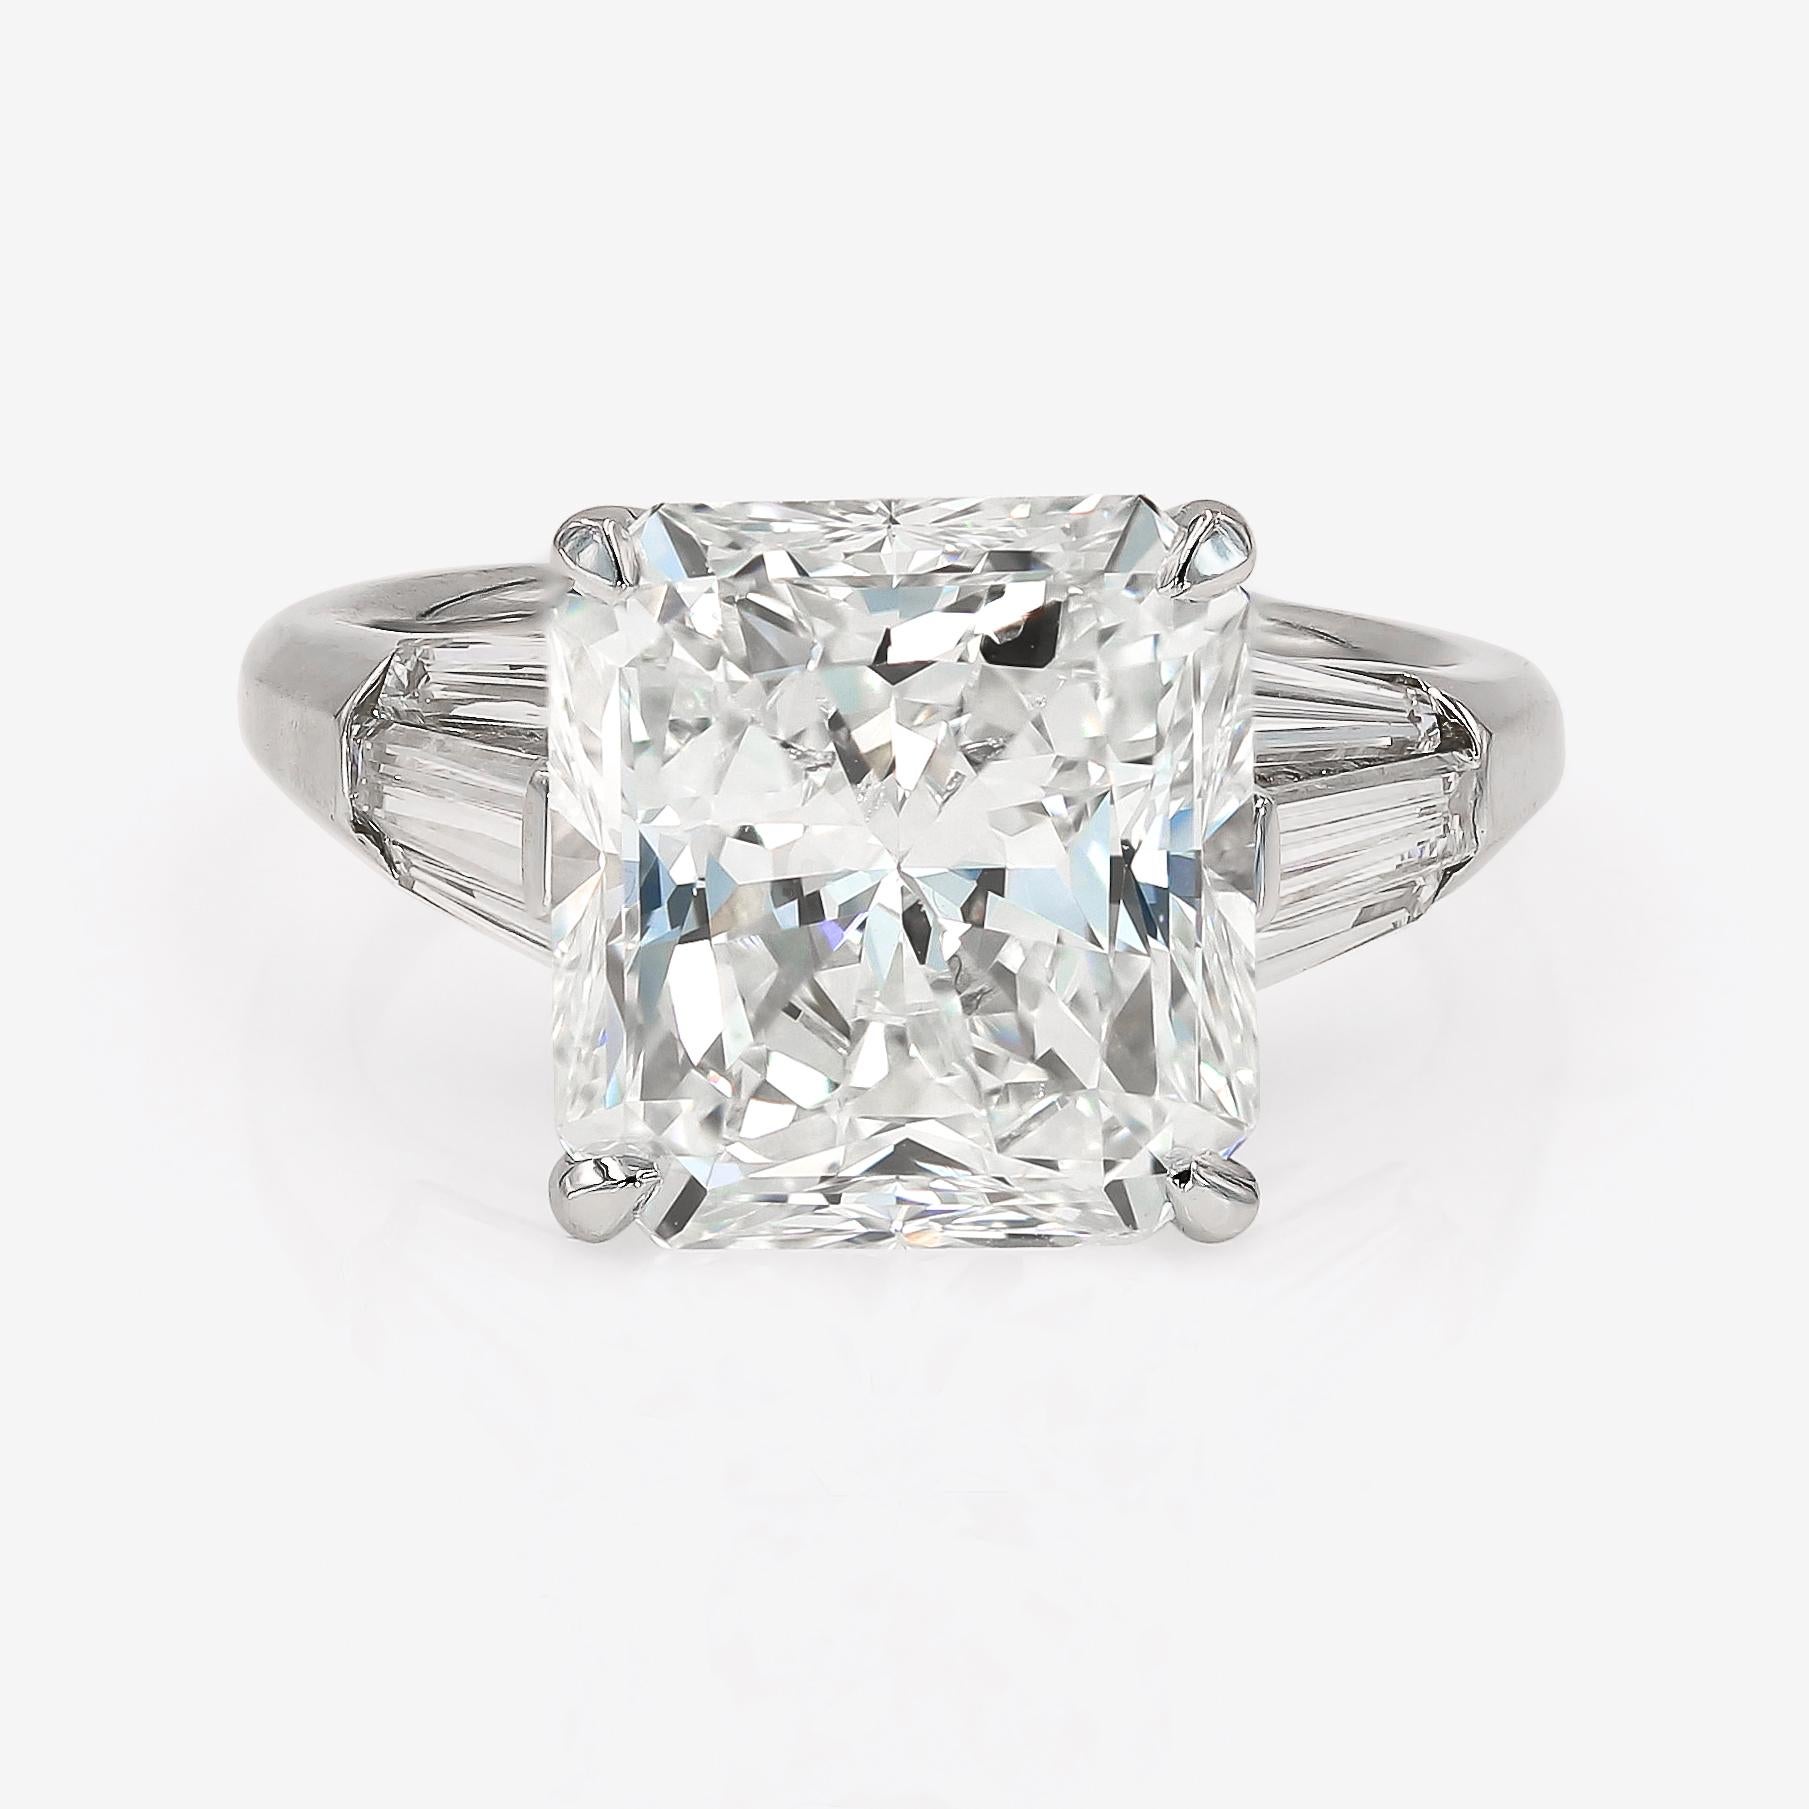 This Lester Lampert original Signature style engagement ring in platinum features a 6.14cts. radiant cut center that is I in color and VS2 in clarity. It is surrounded by 6 long tapered baguette diamonds= 1.13cts. t.w. There are 3 on each side of